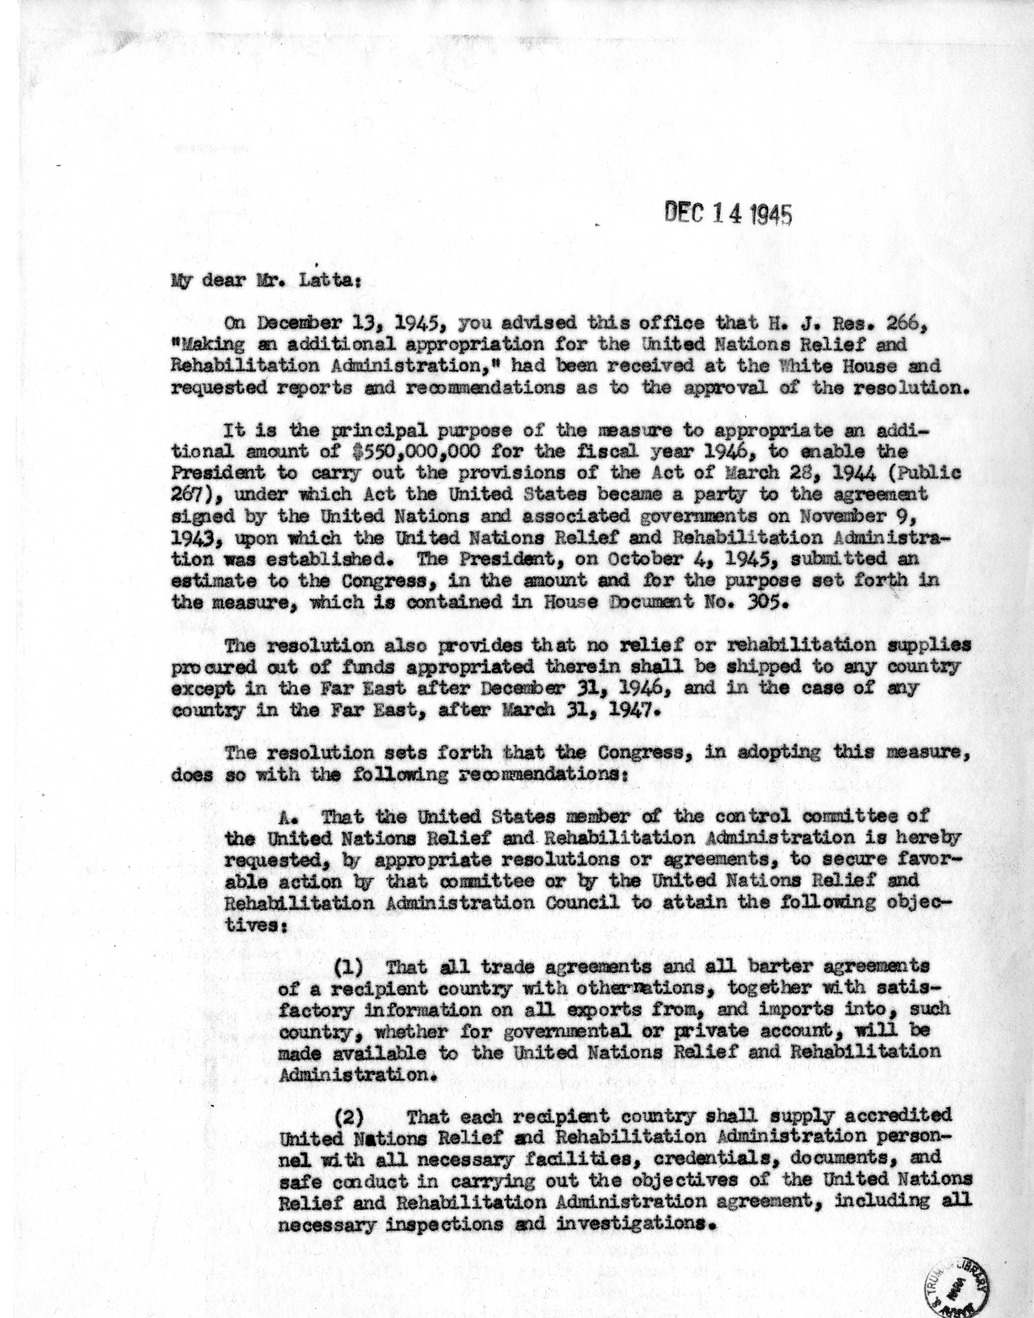 Memorandum from Harold D. Smith to M. C. Latta, H.J. Res. 266, Making an Additional Appropriation for the United Nations Relief and Rehabilitation Administration, with Attachments